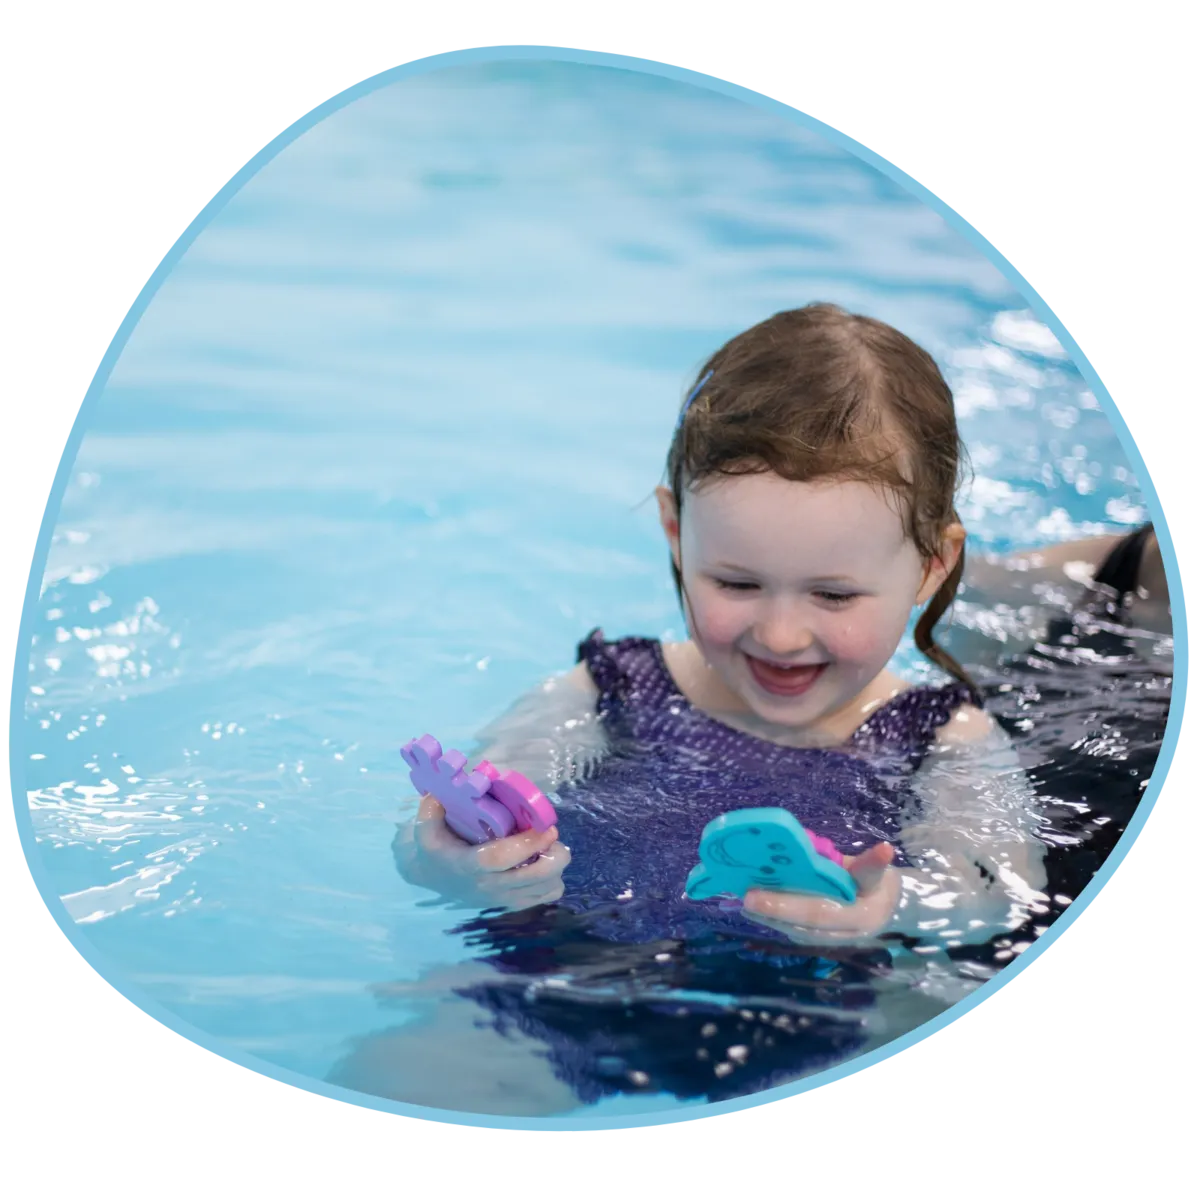 A young girl plays with toys in a swimming pool